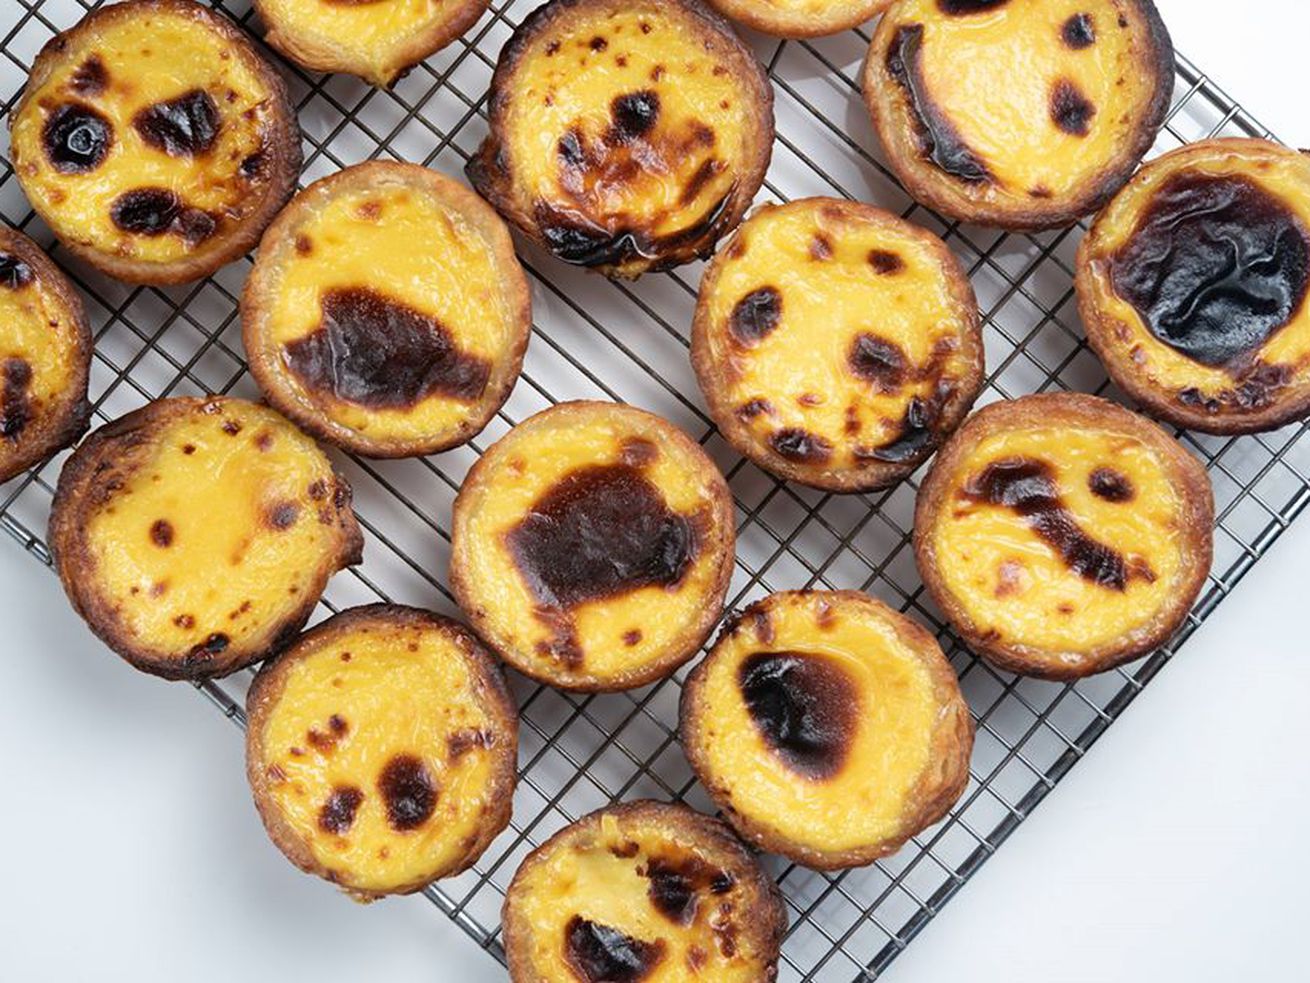 Egg tarts cooling on a wire rack